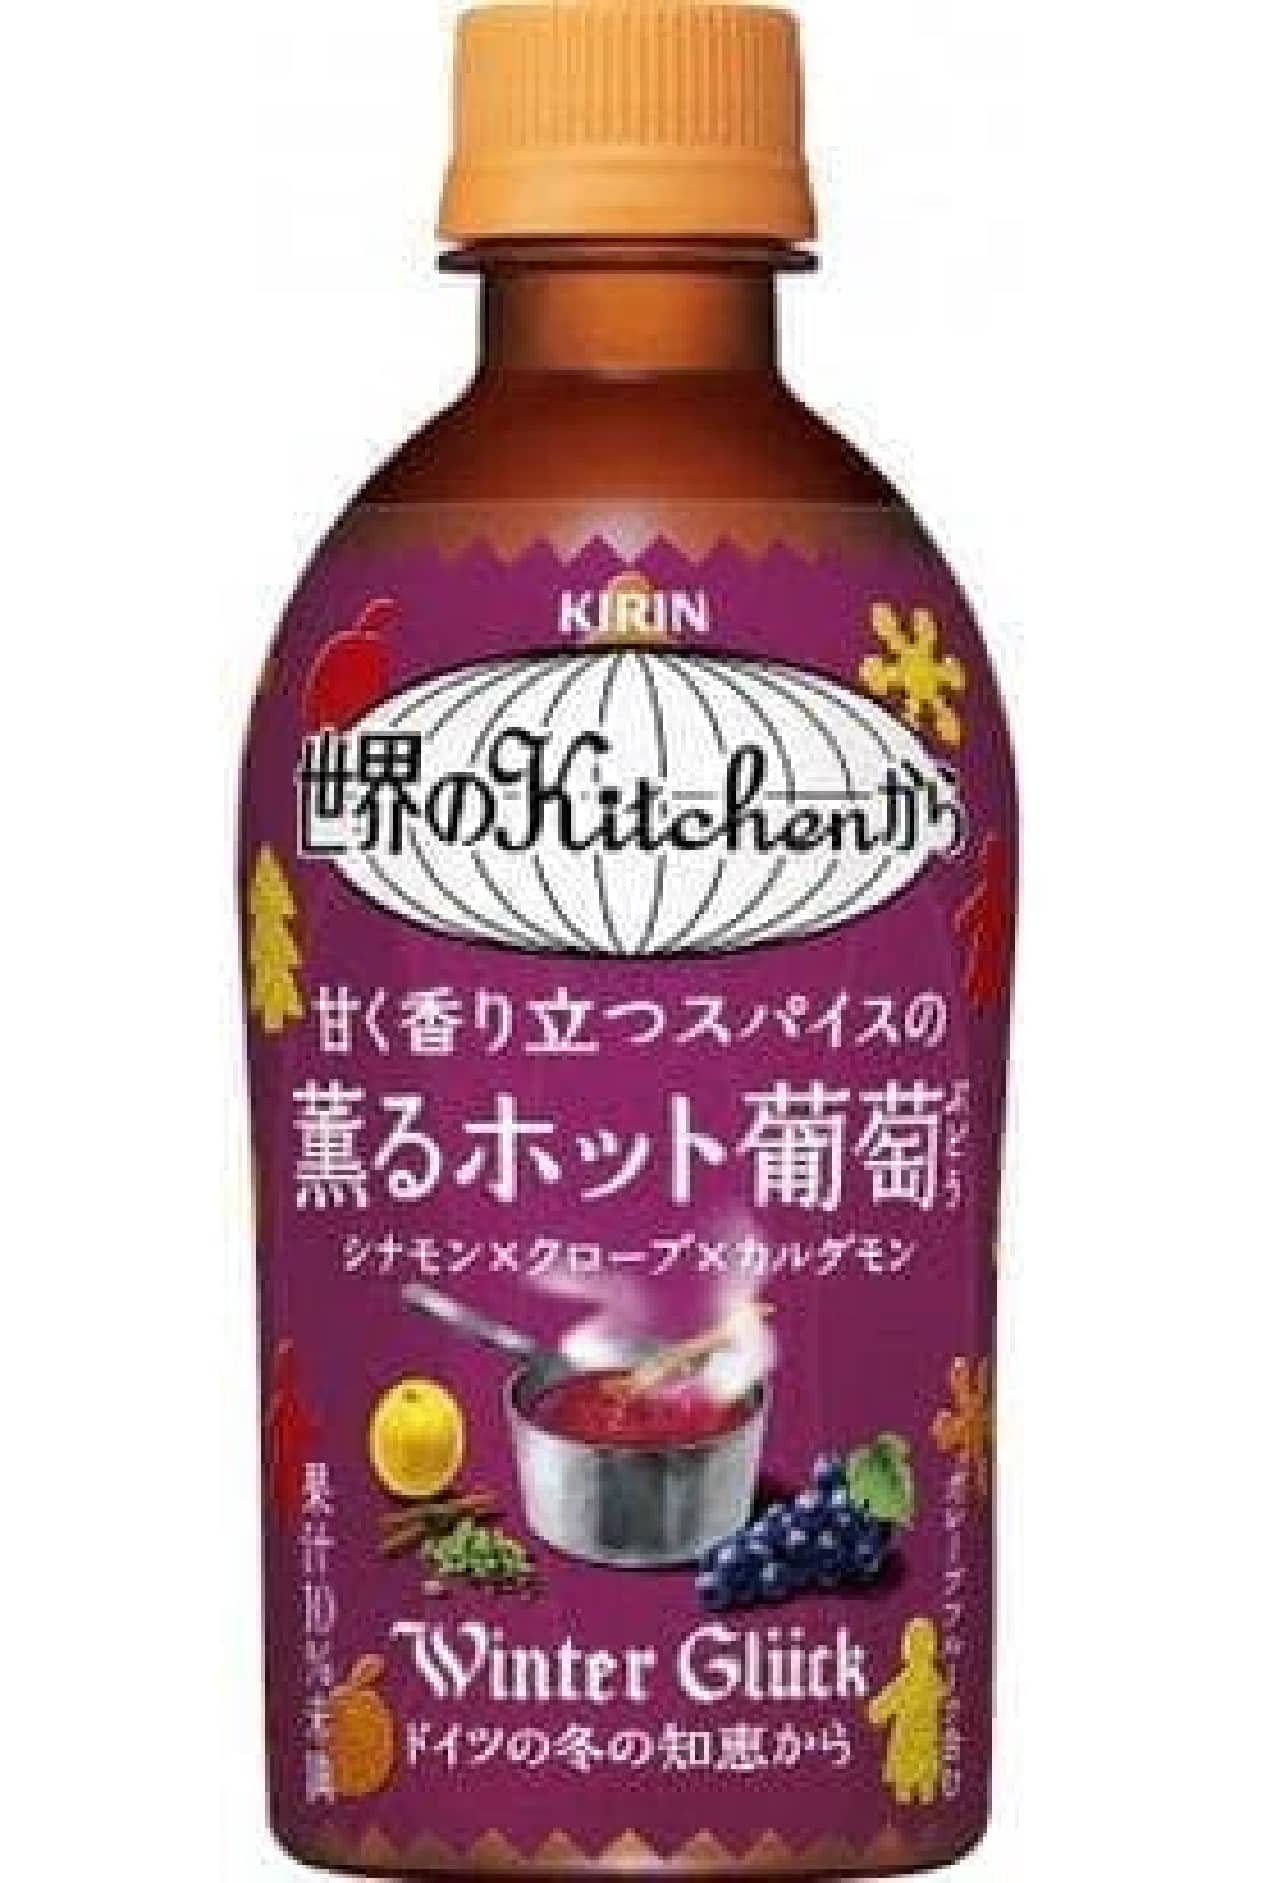 Kirin Beverage "Hot grapes with sweet and fragrant spices from Kitchens around the world"